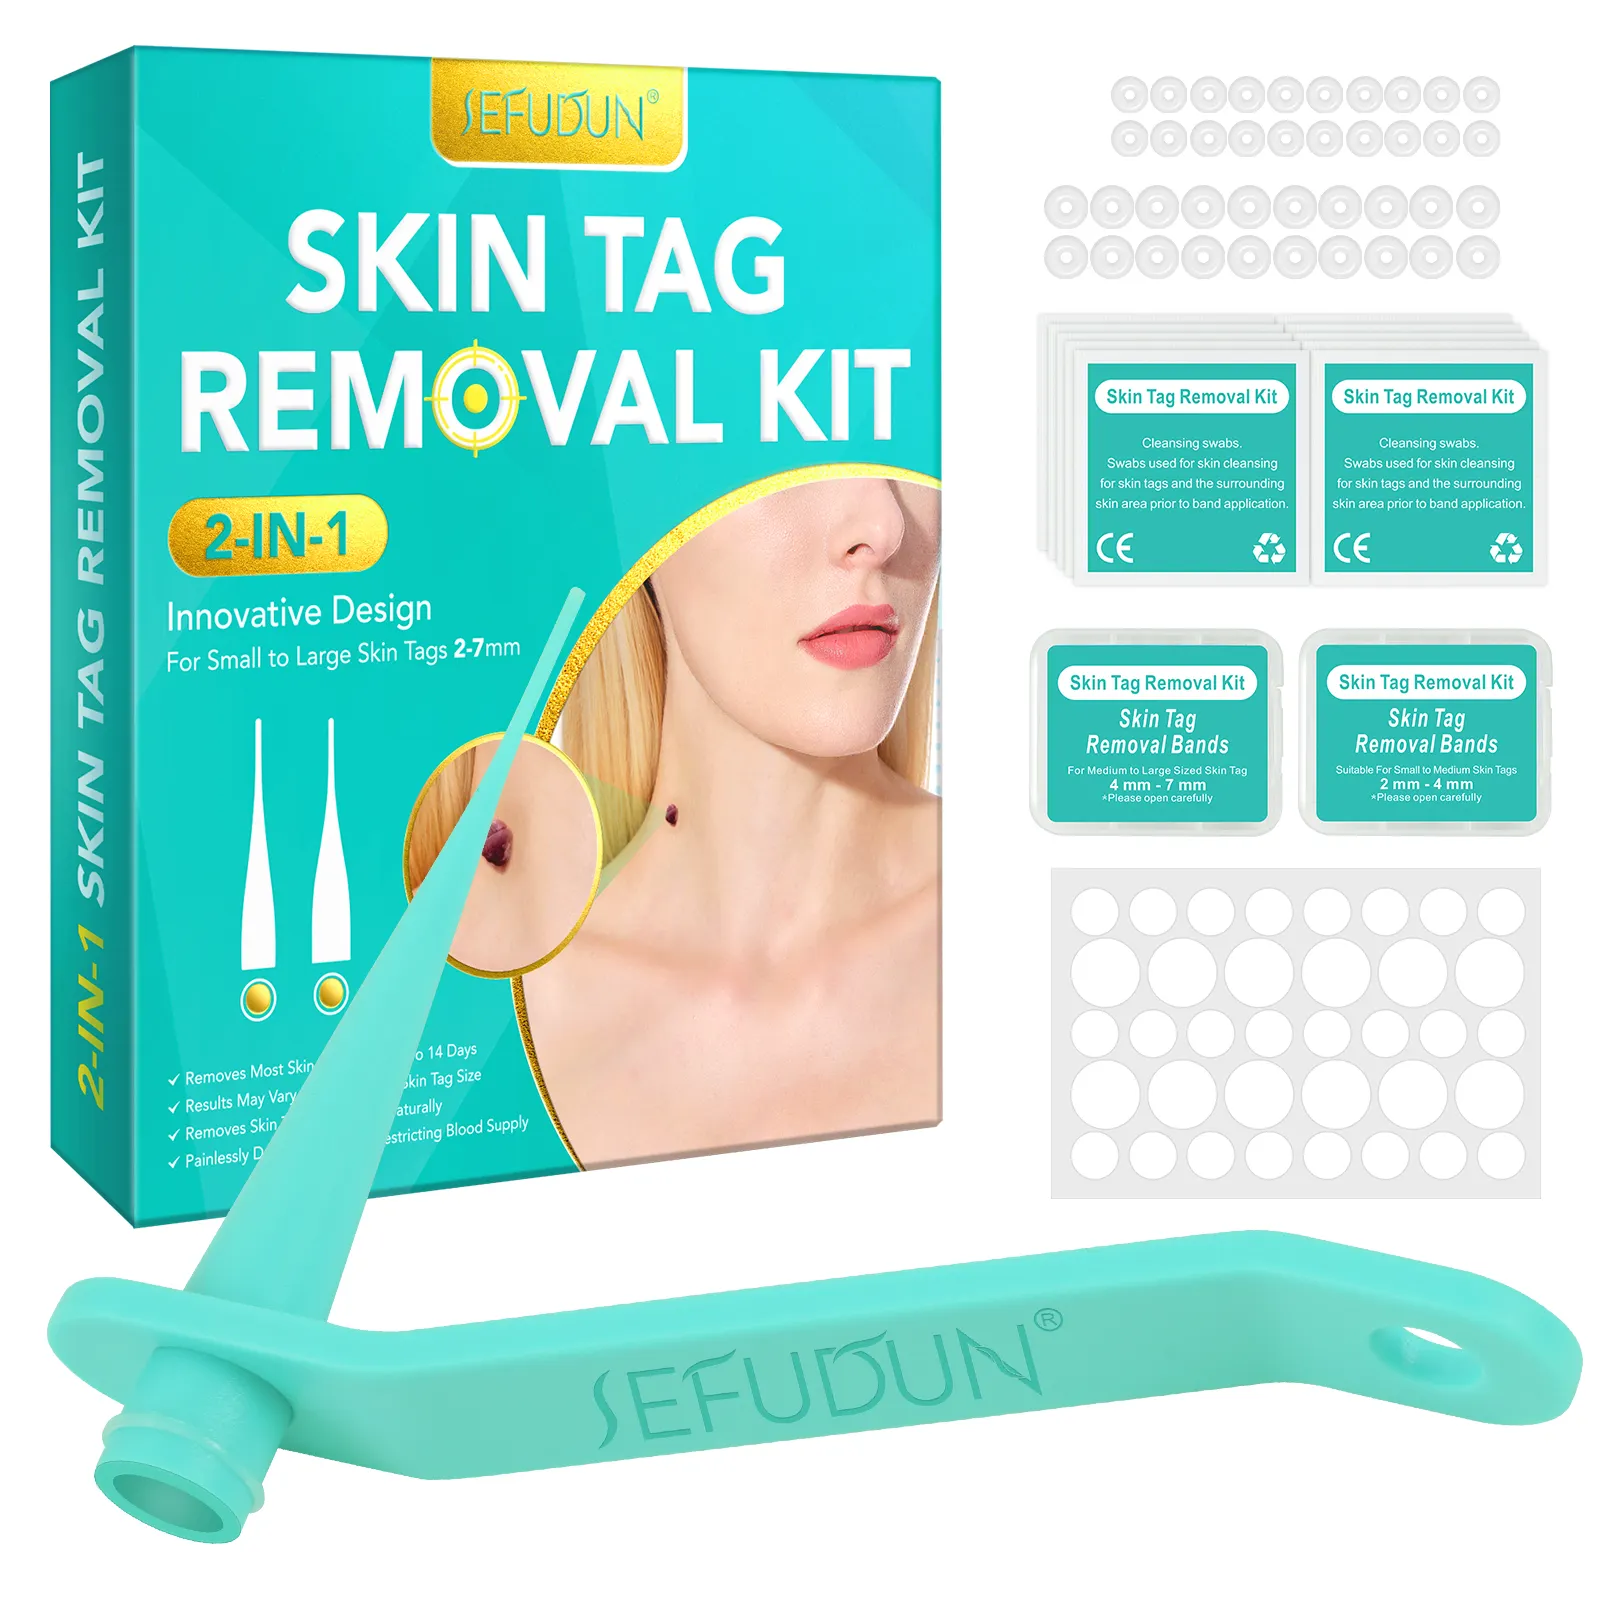 Hot Sale Fast Effective 2 In 1 Skin Tag and Mole Remover Pen Kit for Small to Large Skin Tags 2-7mm